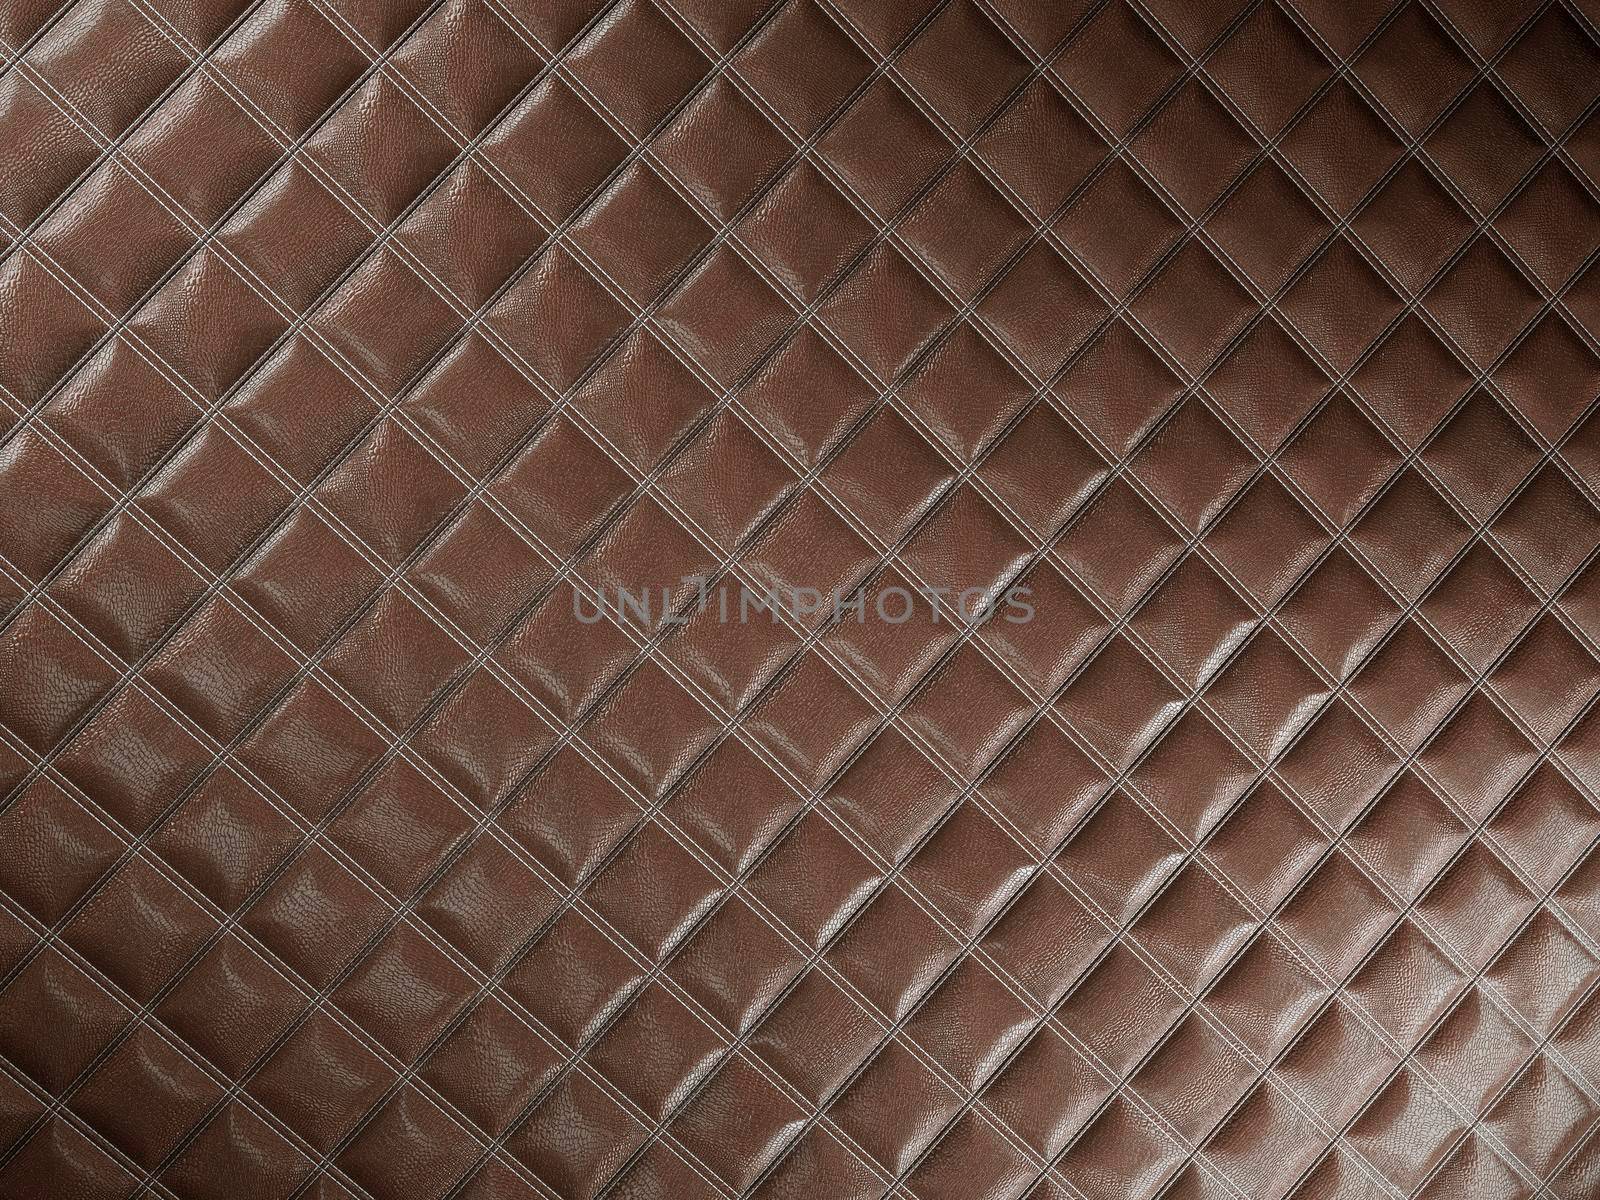 Alligator or crocodile brown Leather. Square stitched texture or background with bumps. 3d render, 3d illustration